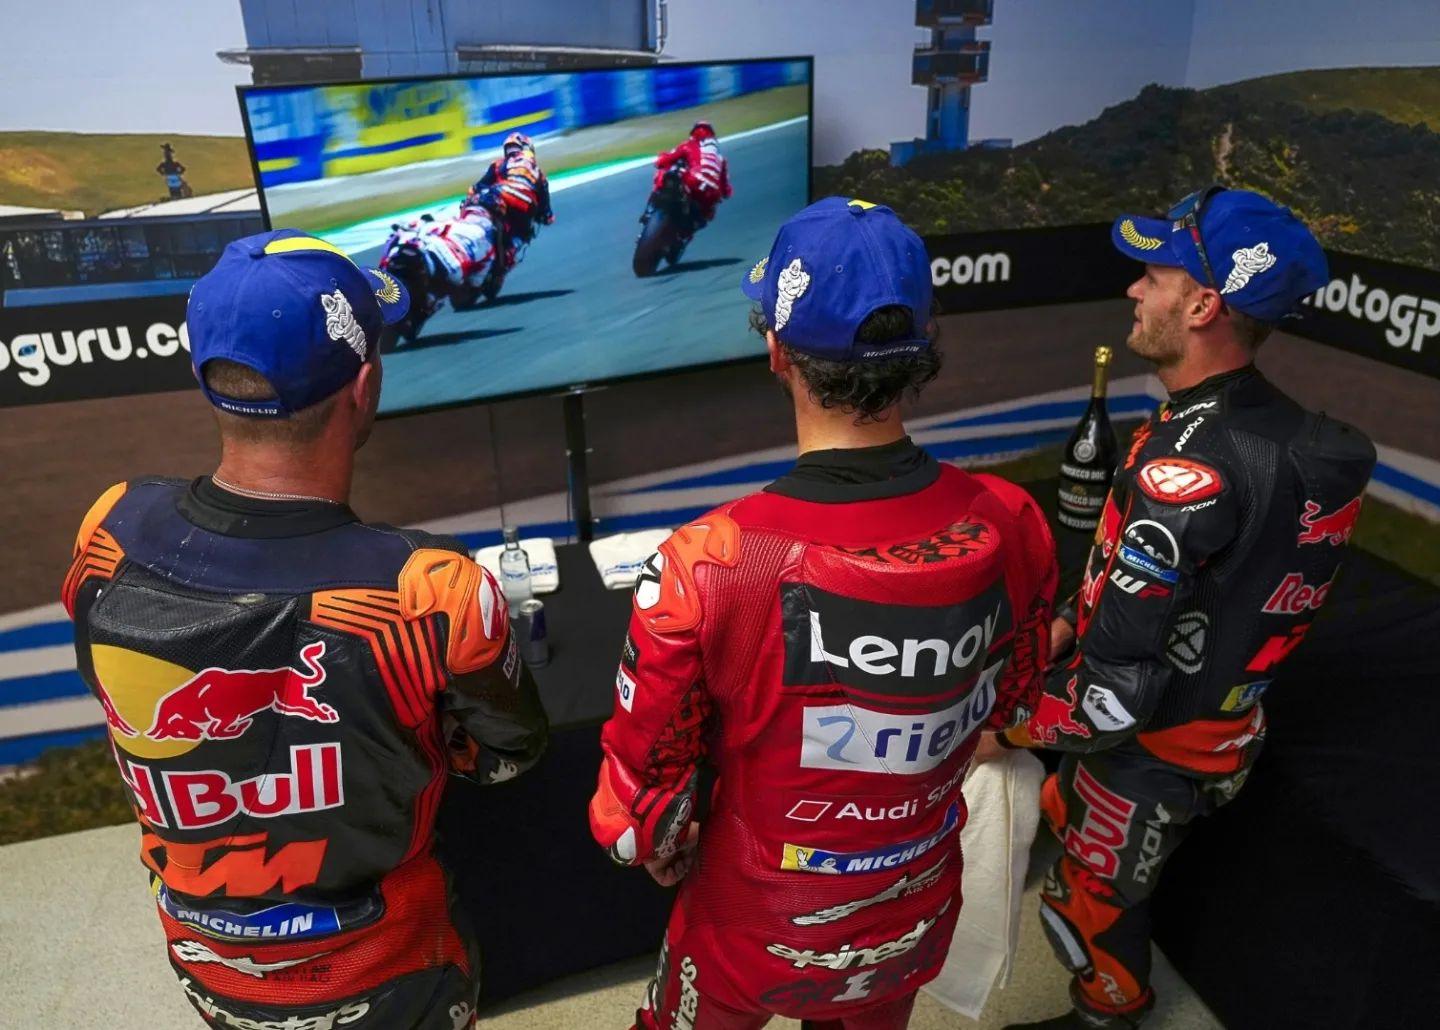 Does MotoGP need to take lessons from F1 once again, albeit improved upon? - MotoProWorks